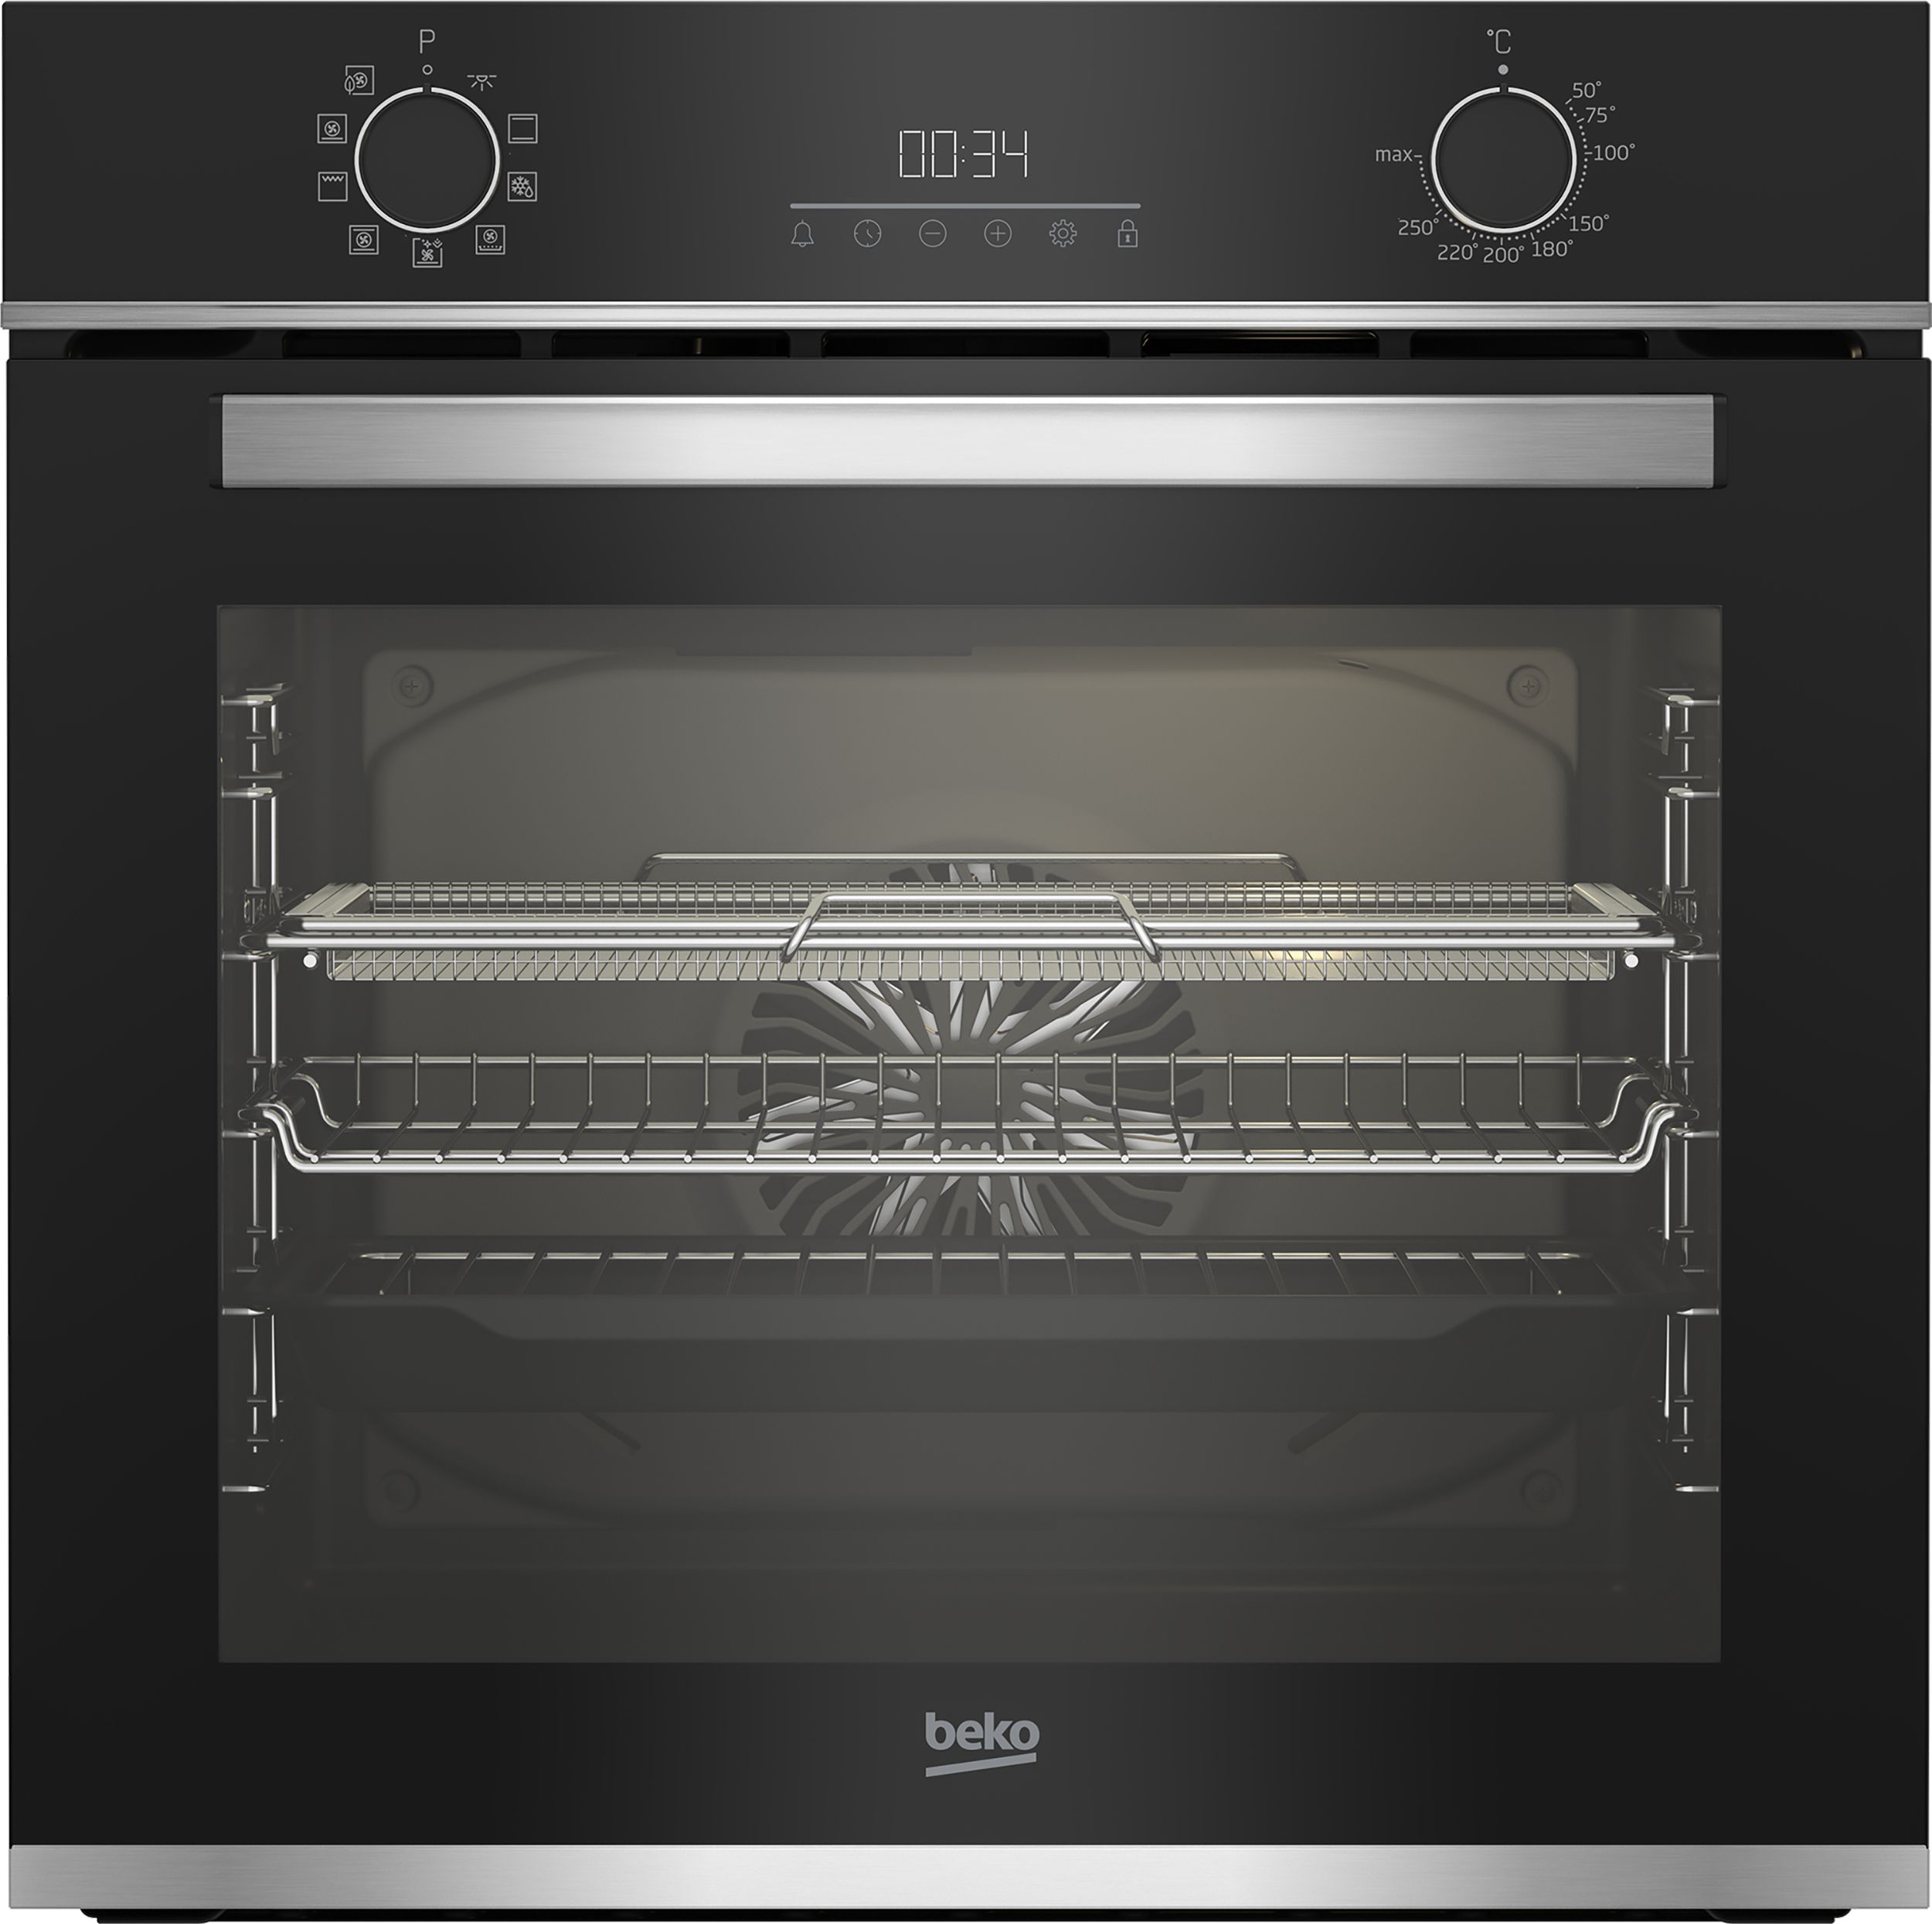 Beko AeroPerfect RecycledNet BBIMA13300XC Built In Electric Single Oven - Stainless Steel - A+ Rated, Stainless Steel